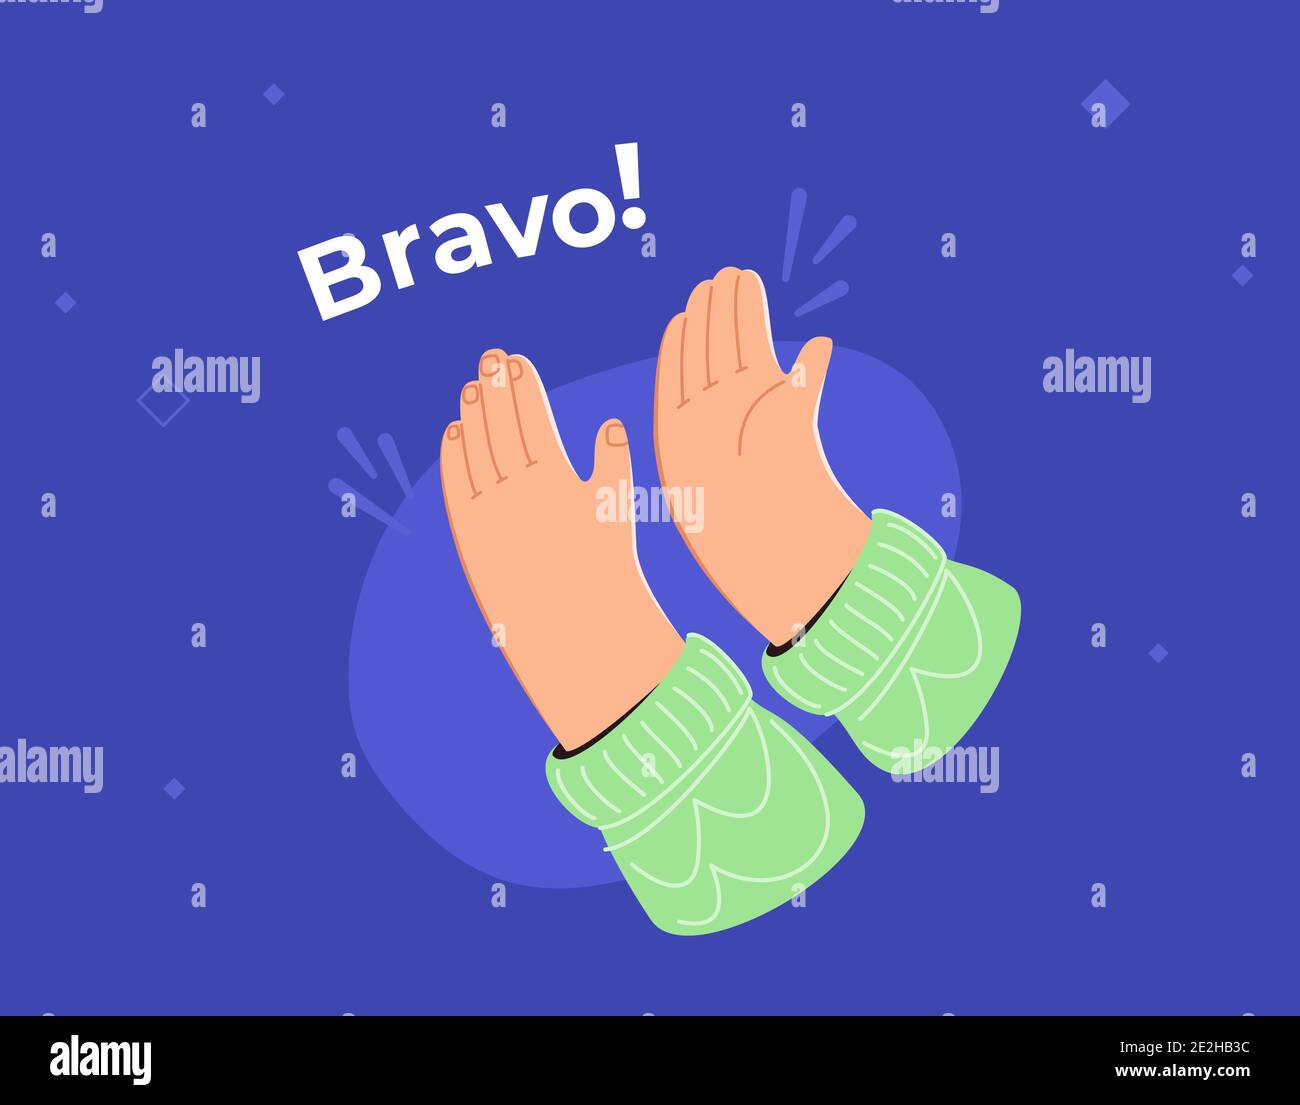 Human hands friendly clapping and cheering bravo Stock Vector